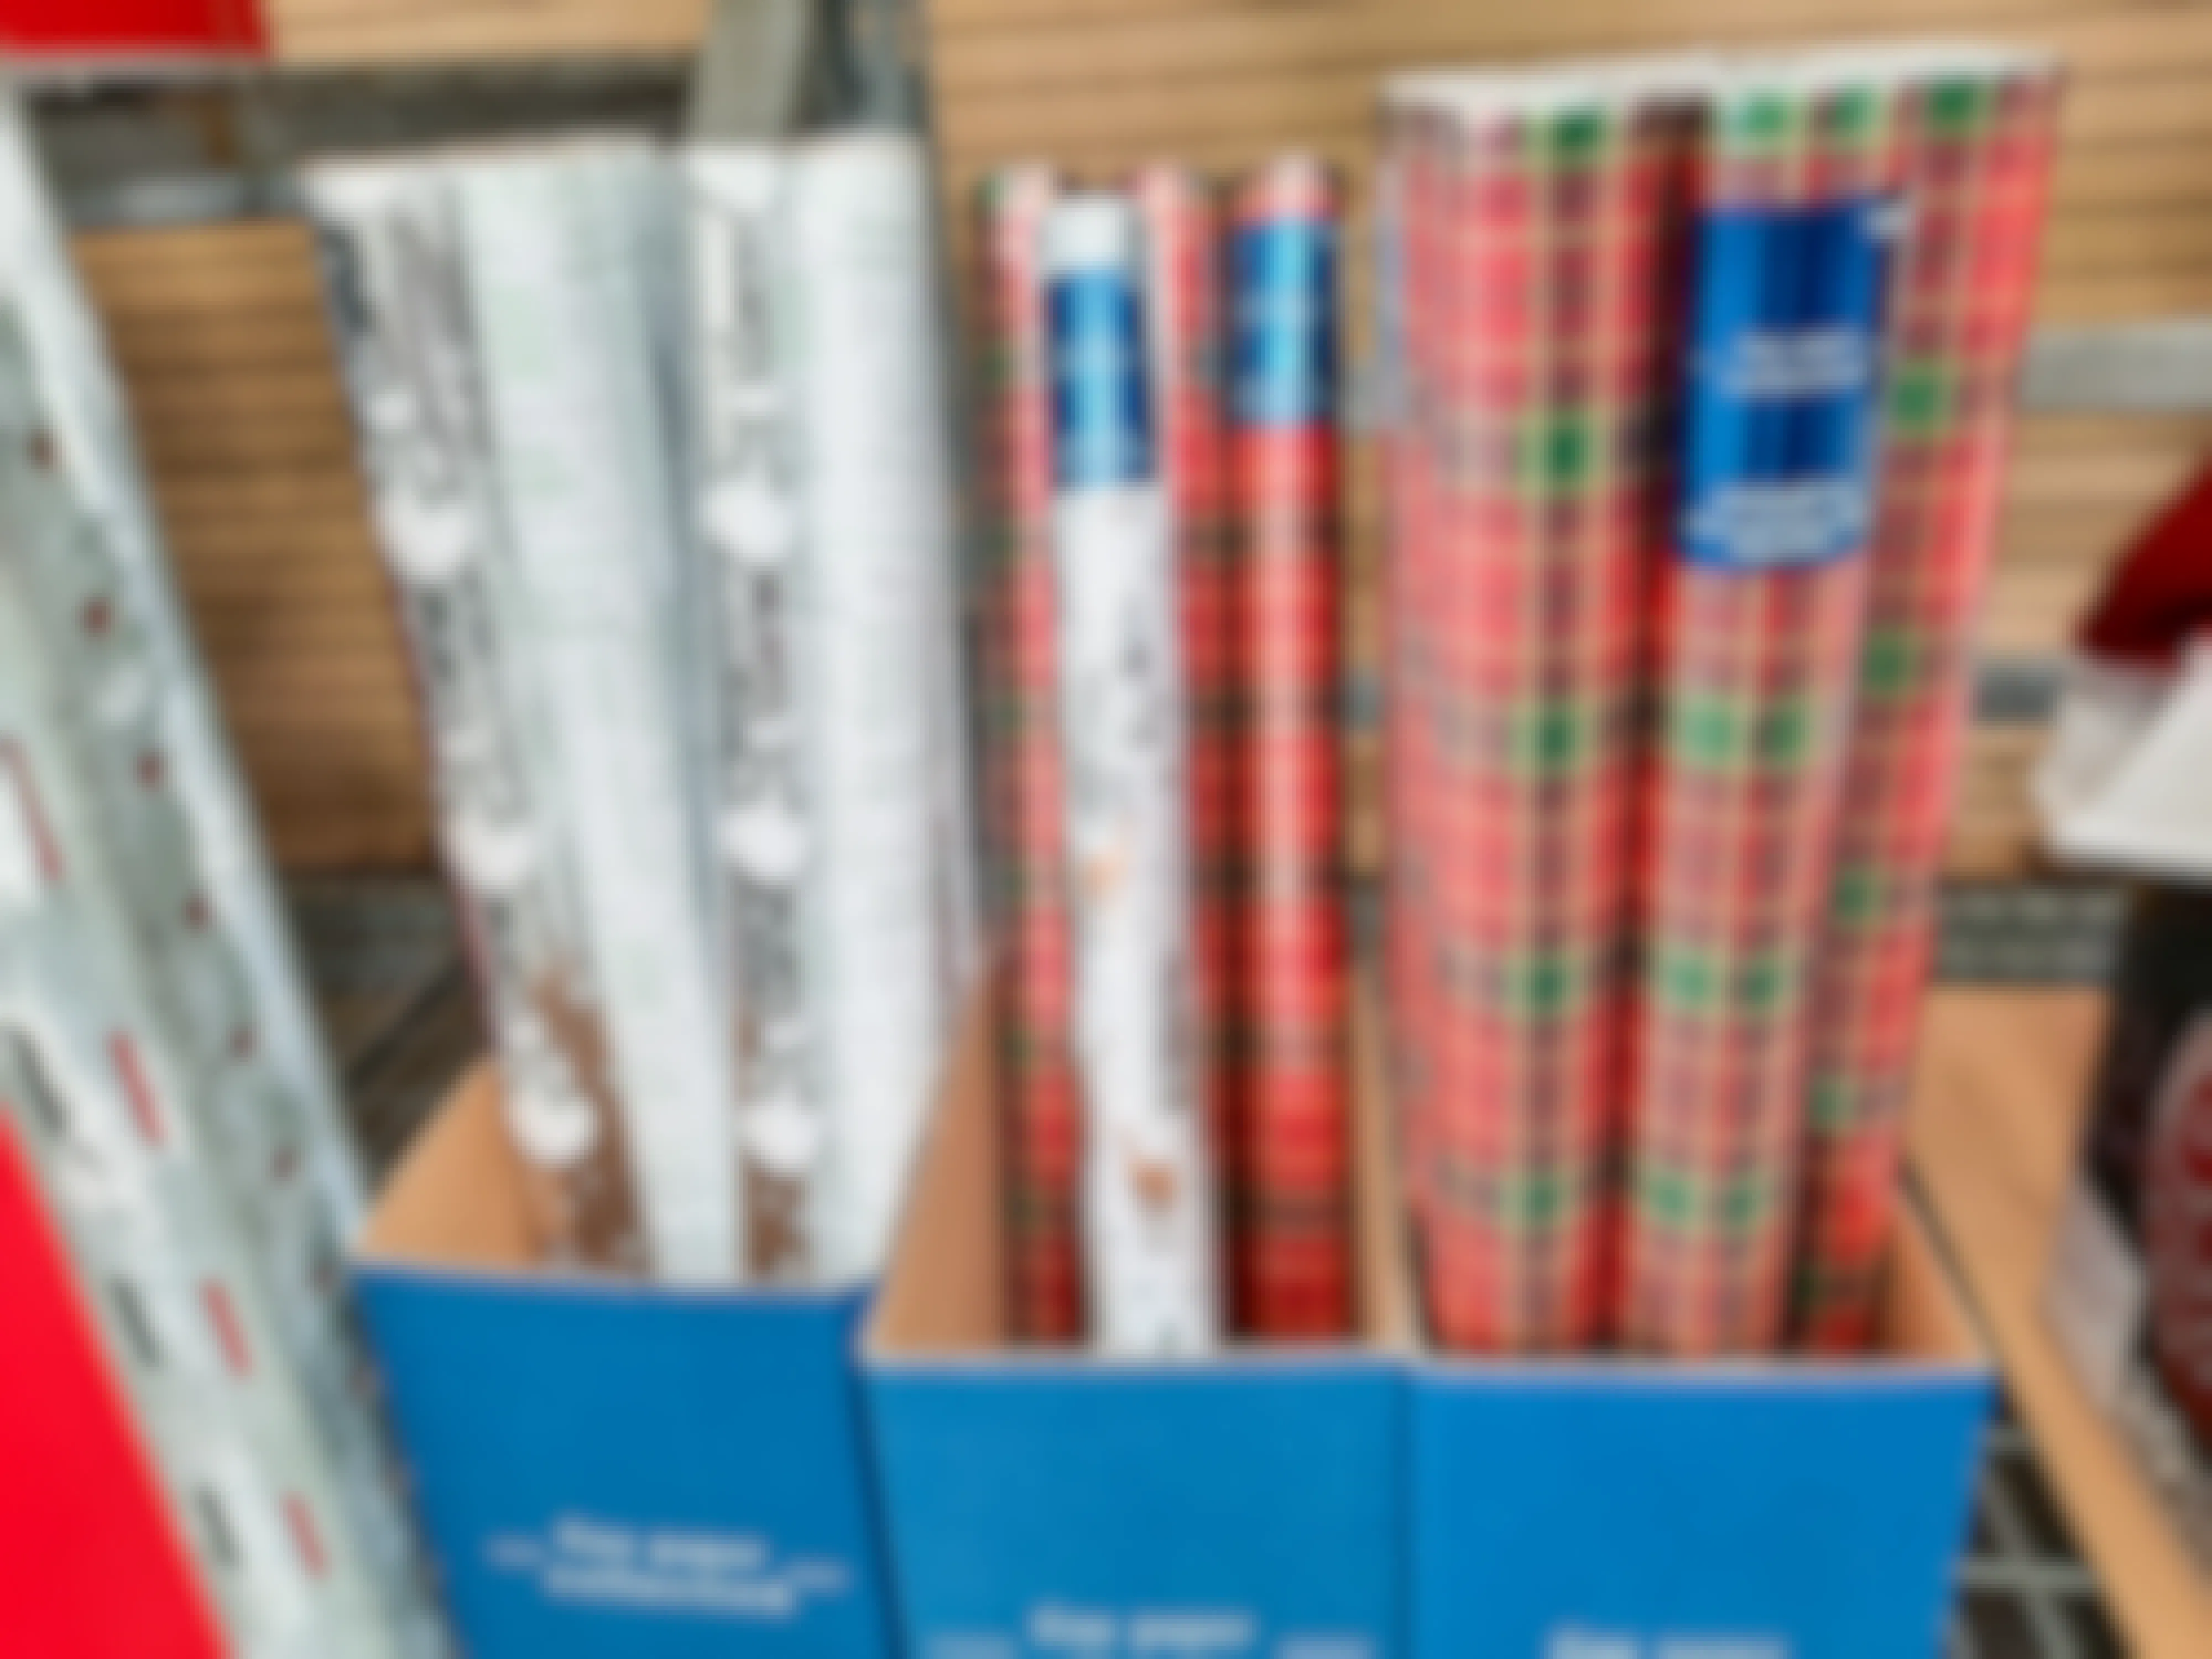 Christmas gift wrapping paper stocked in Walmart